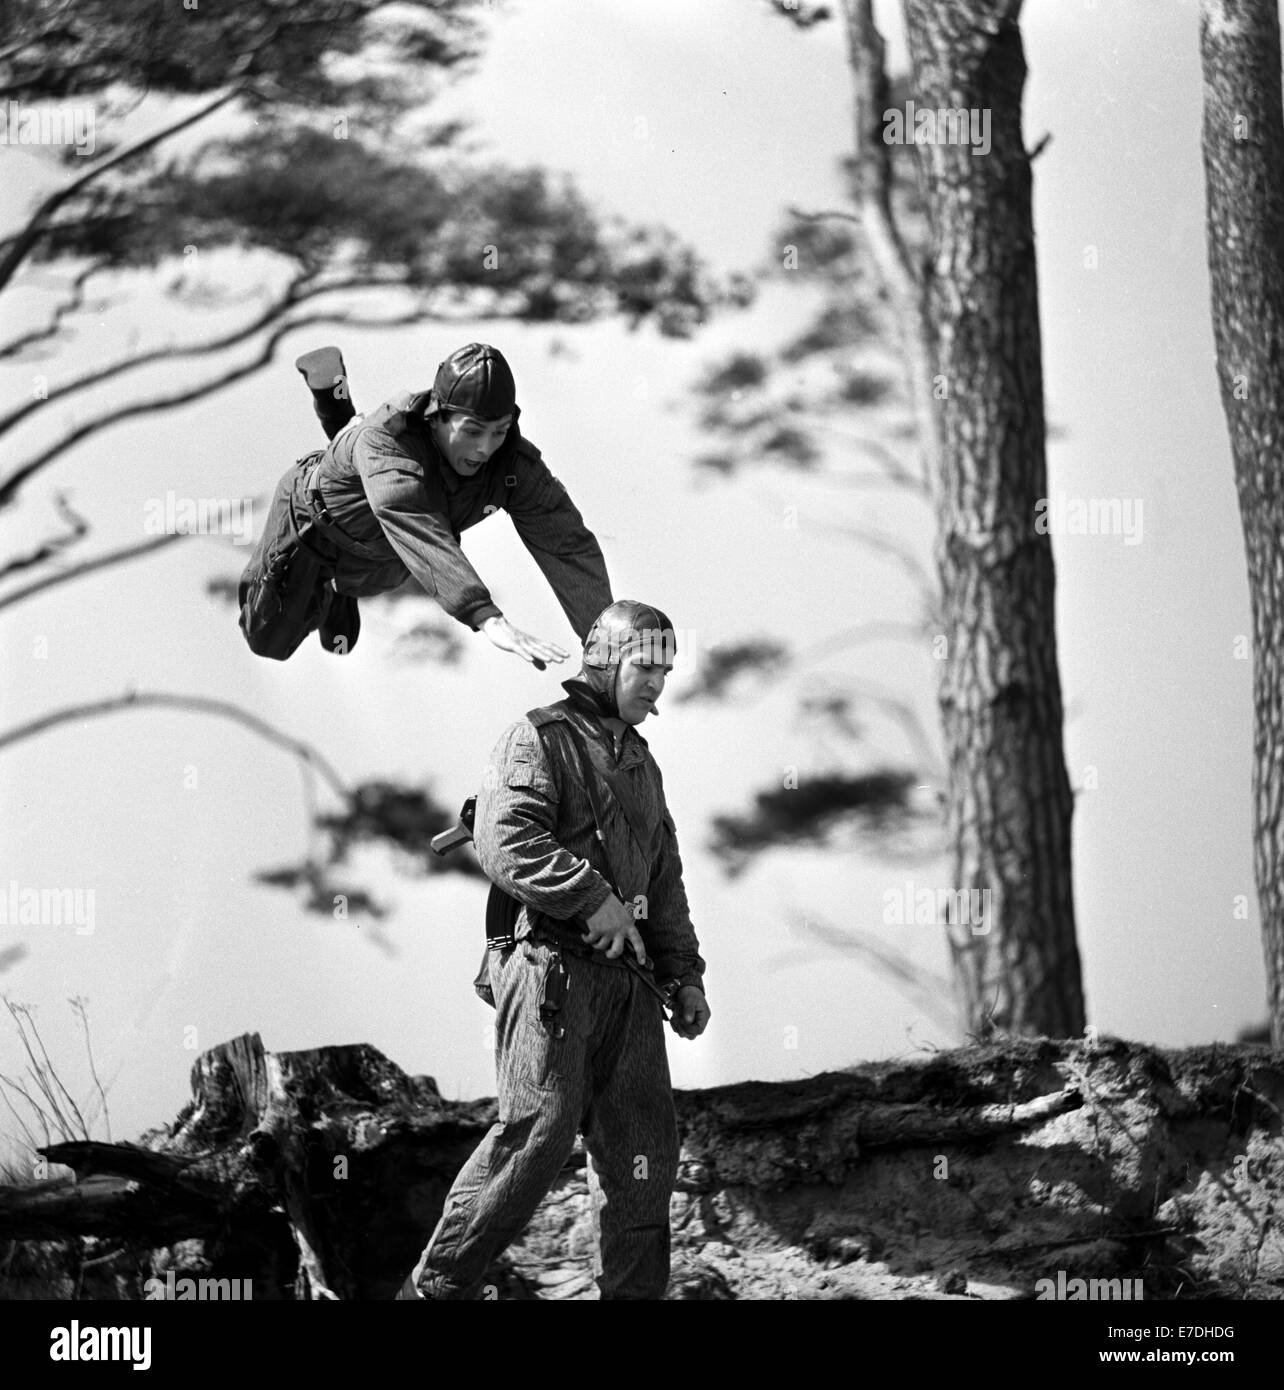 A paratrooper jumps onto an 'enemy' from behind during a training session with a unit of the East German National People's Army (NPA) in Prora, Germany, 1966. Photo: Ernst-Ludwig Bach Stock Photo